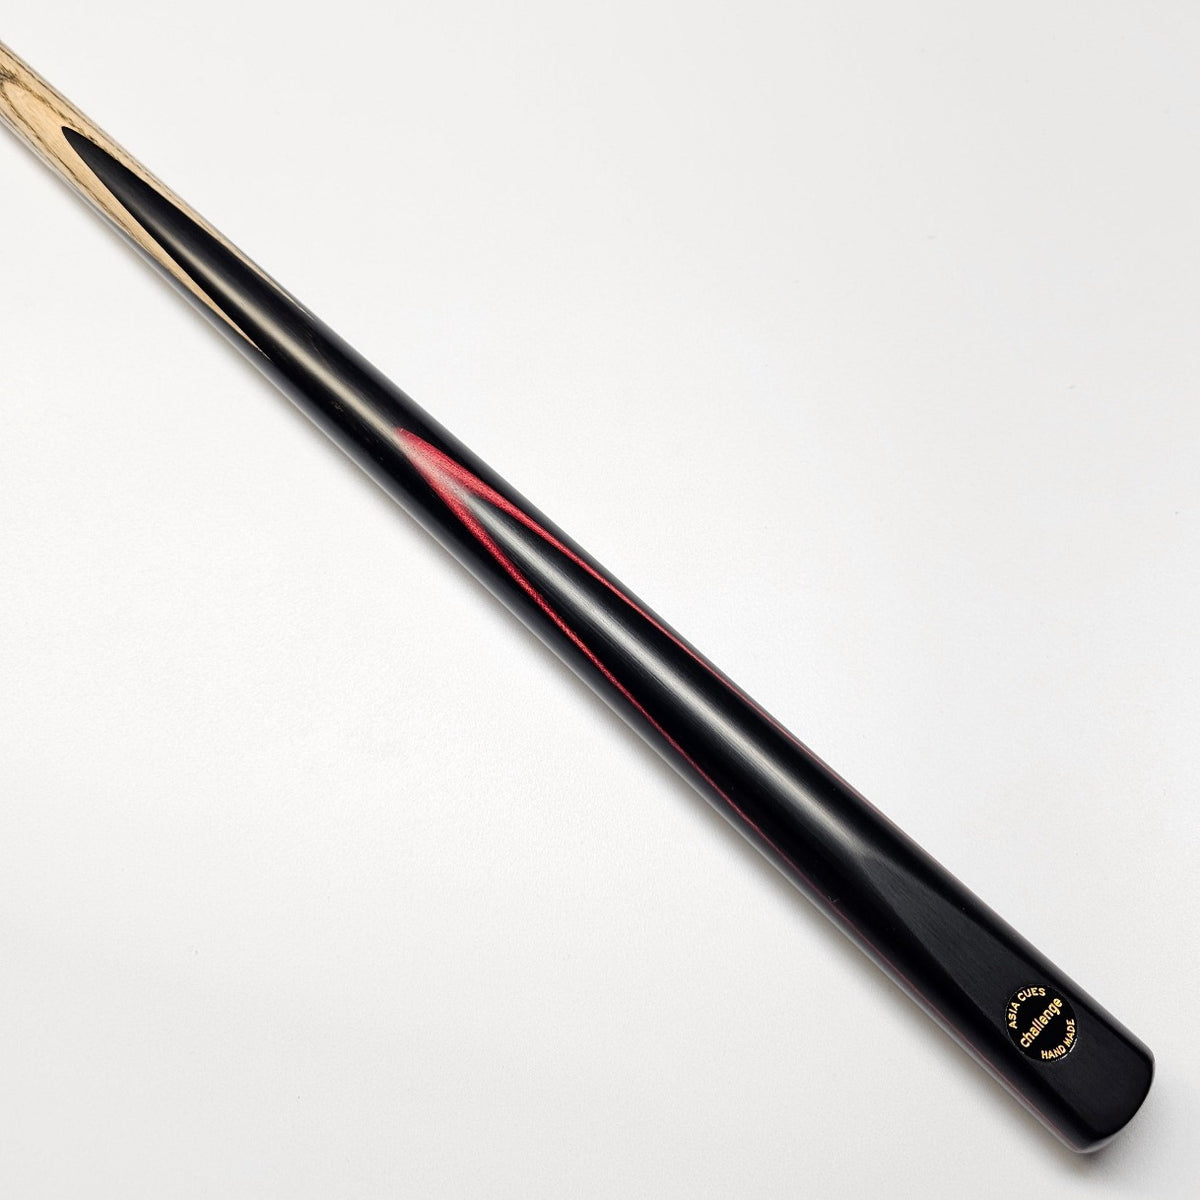 Asia Cues Challenge Range One Piece Cue Ash Shaft Ebony Butt with Red Veneer. Butt View